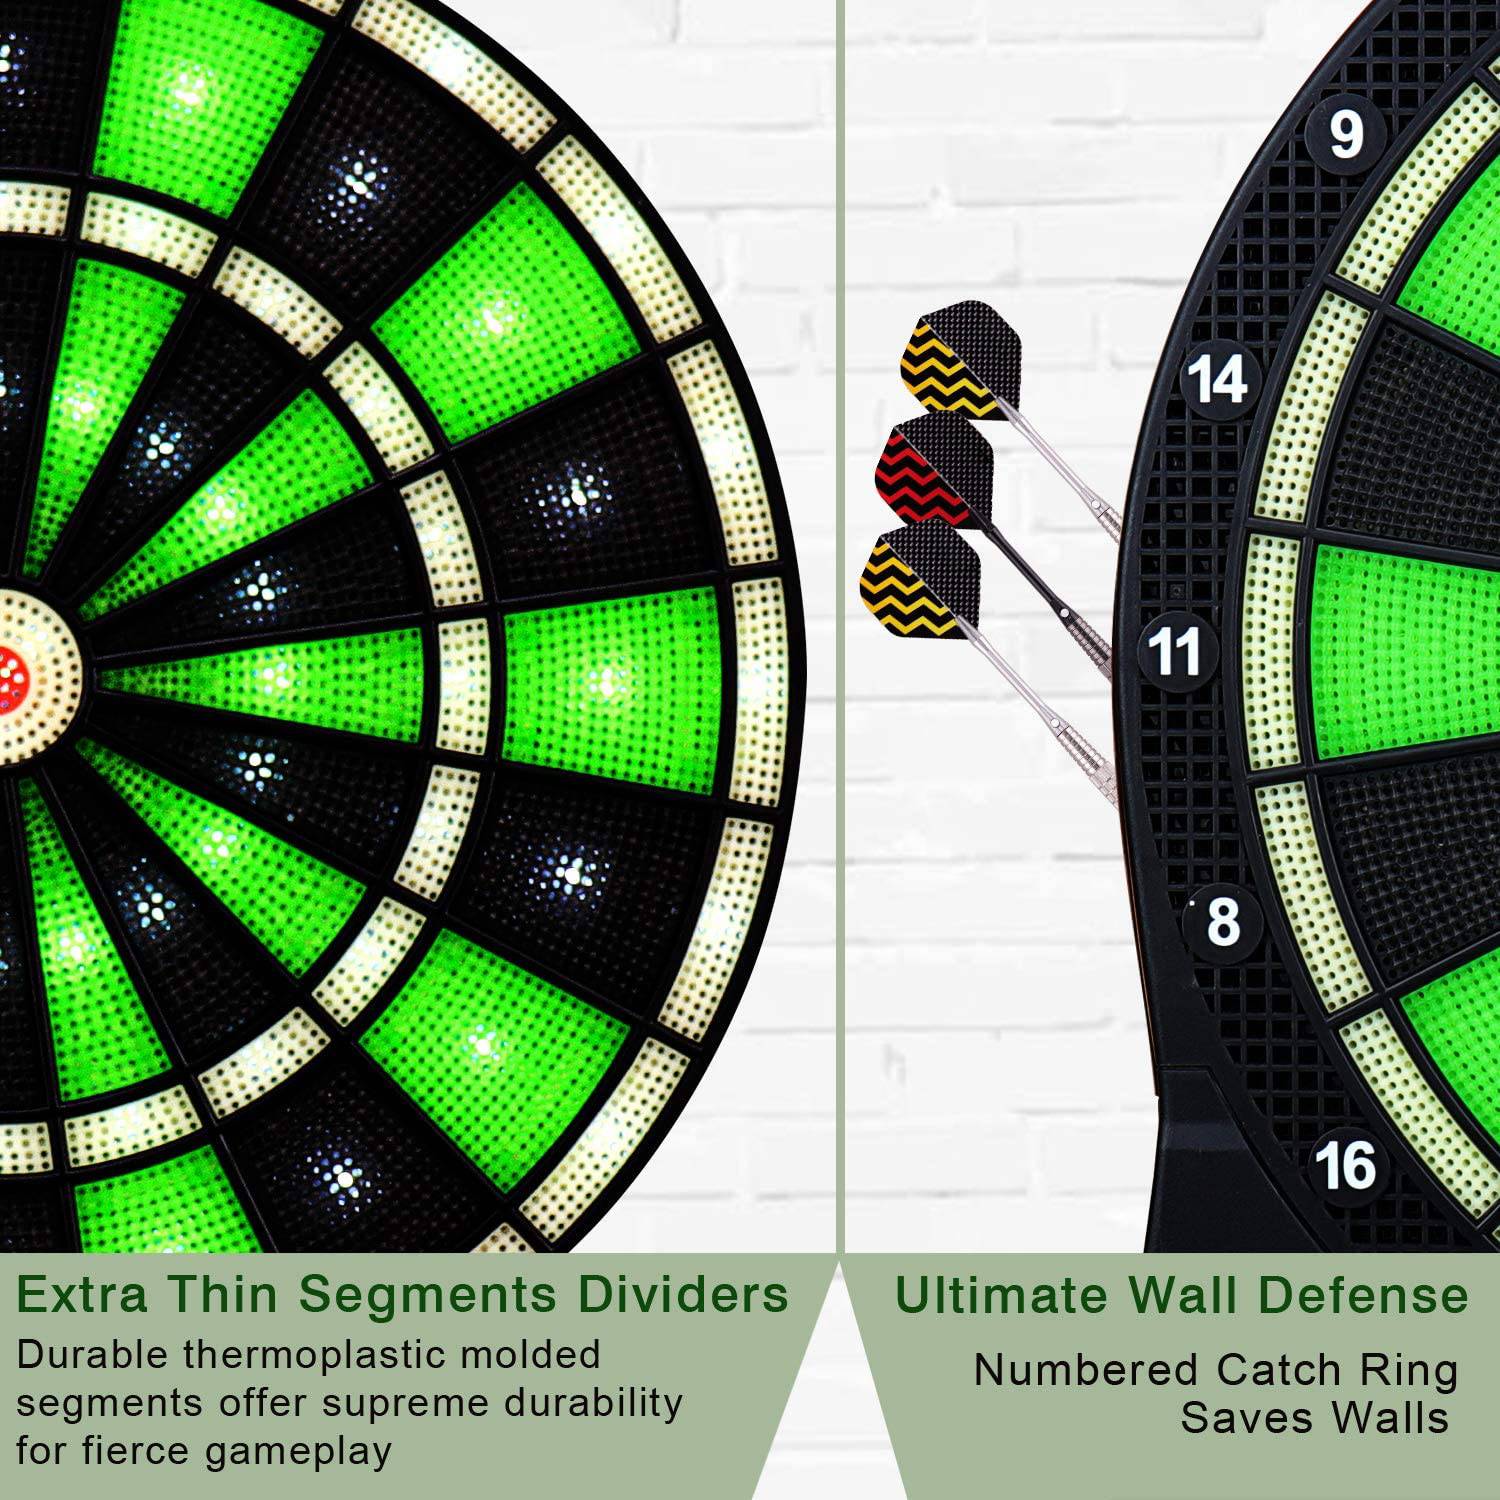 https://www.winmaxdartgame.com/13-inch-best-cheap-dartboard-with-electronic-scoring-win-max-product/